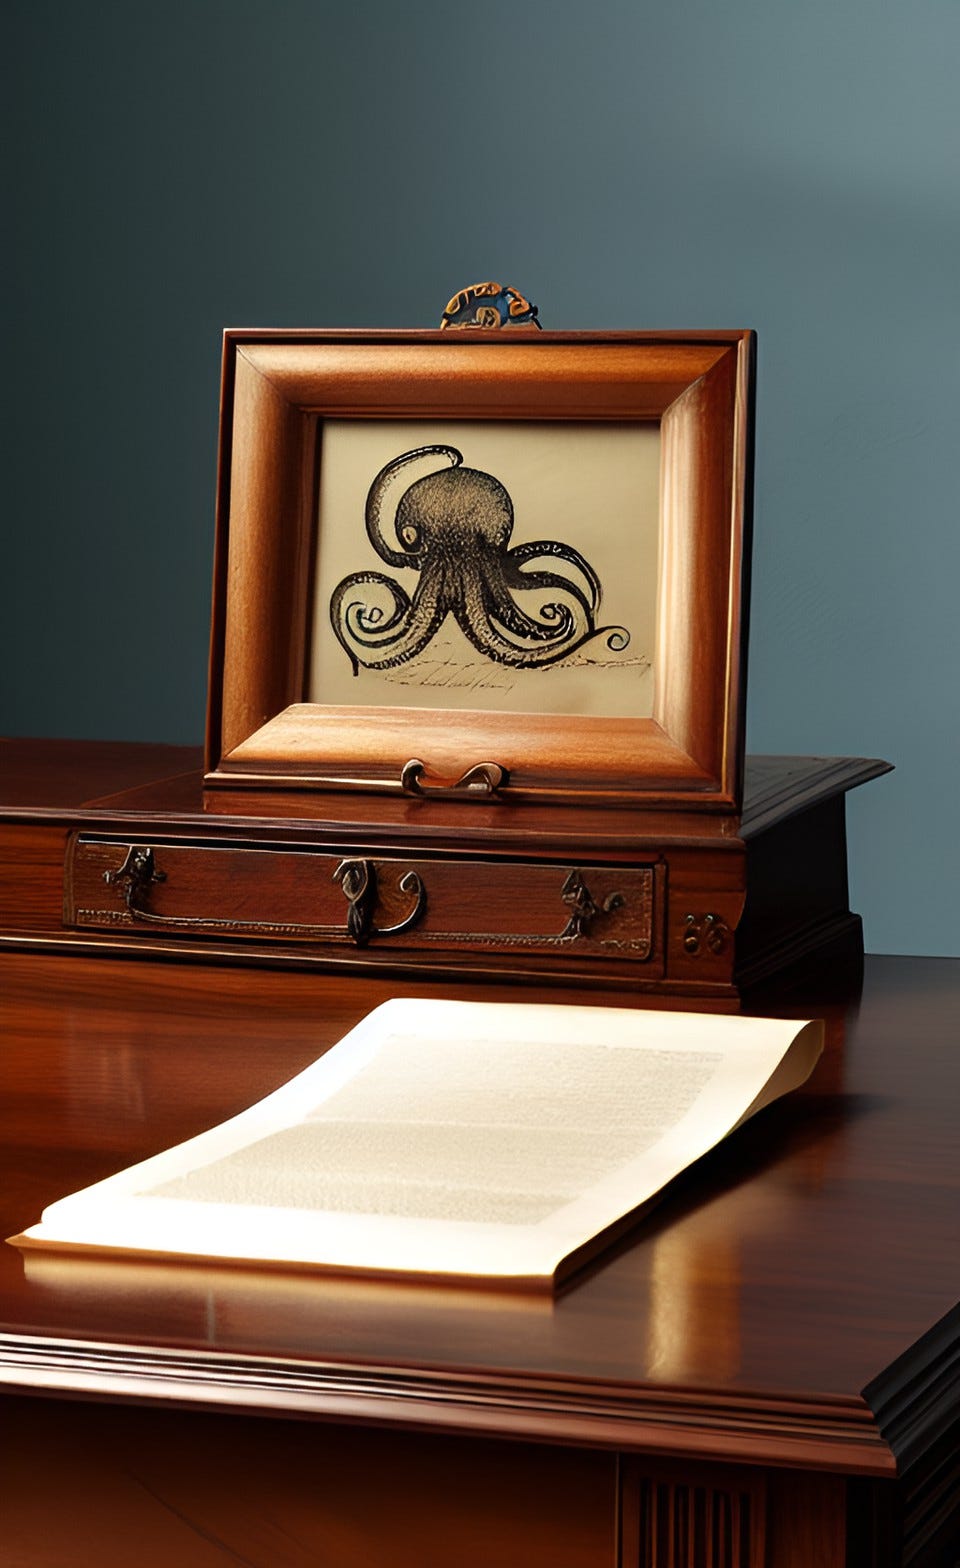 Sketch of an octopus on a desk